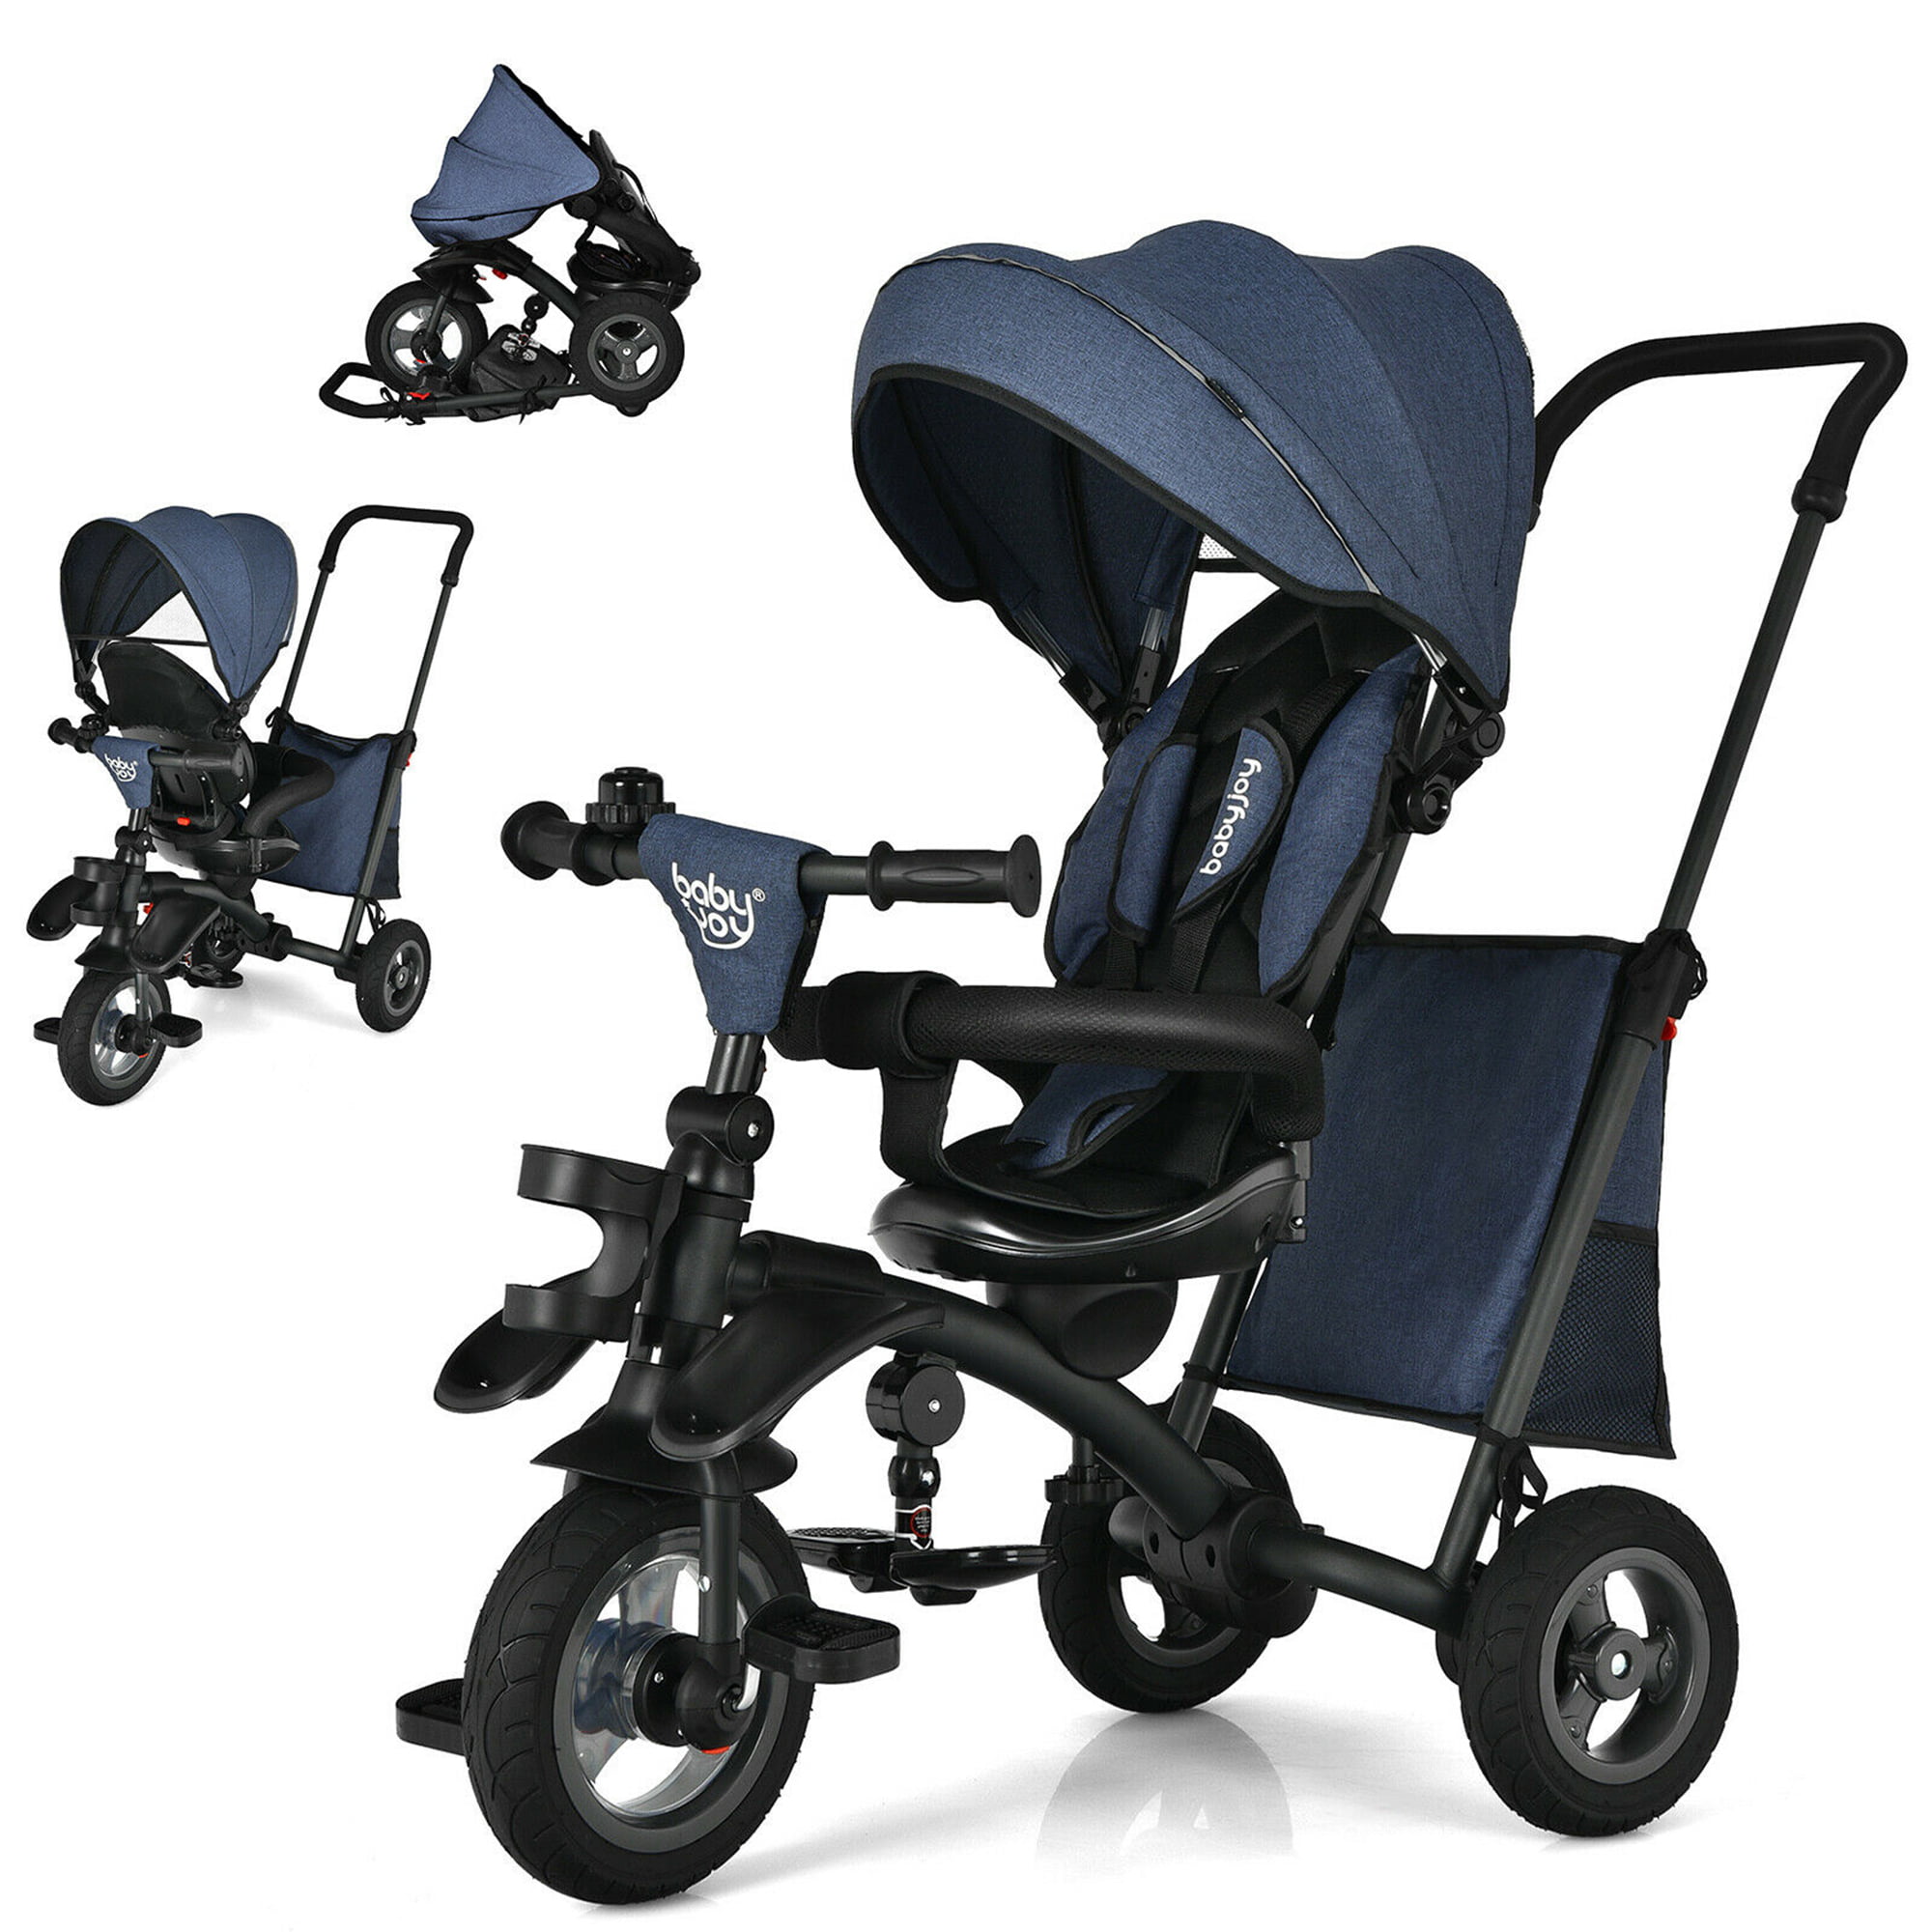 Gymax 7-In-1 Kids Baby Tricycle Folding Steer Stroller w/ Rotatable Seat  Blue - Walmart.com